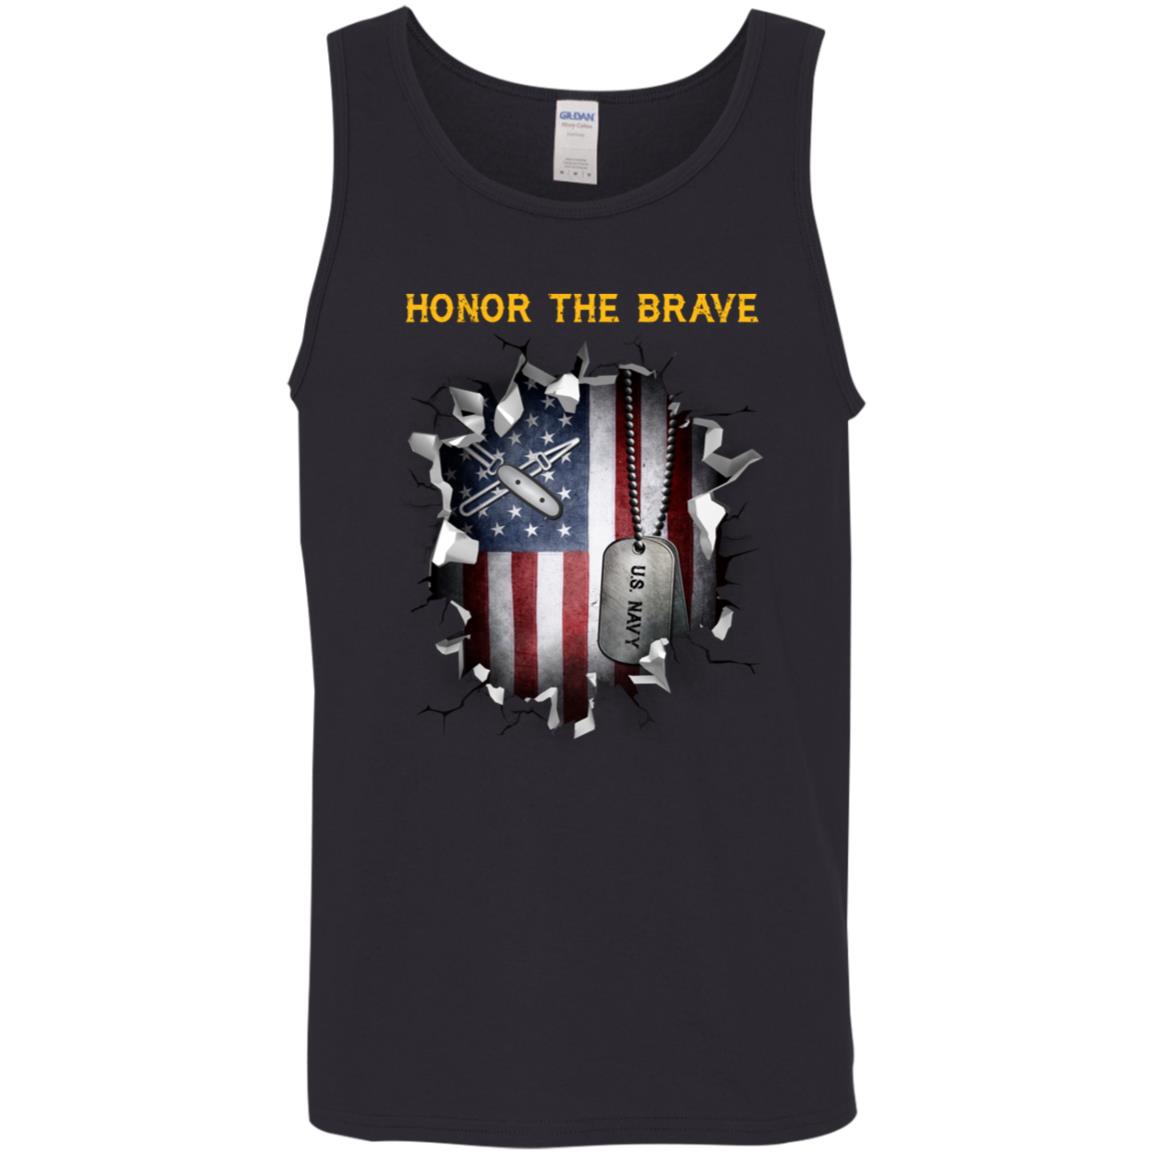 Navy Lithographer Navy LI - Honor The Brave Front Shirt